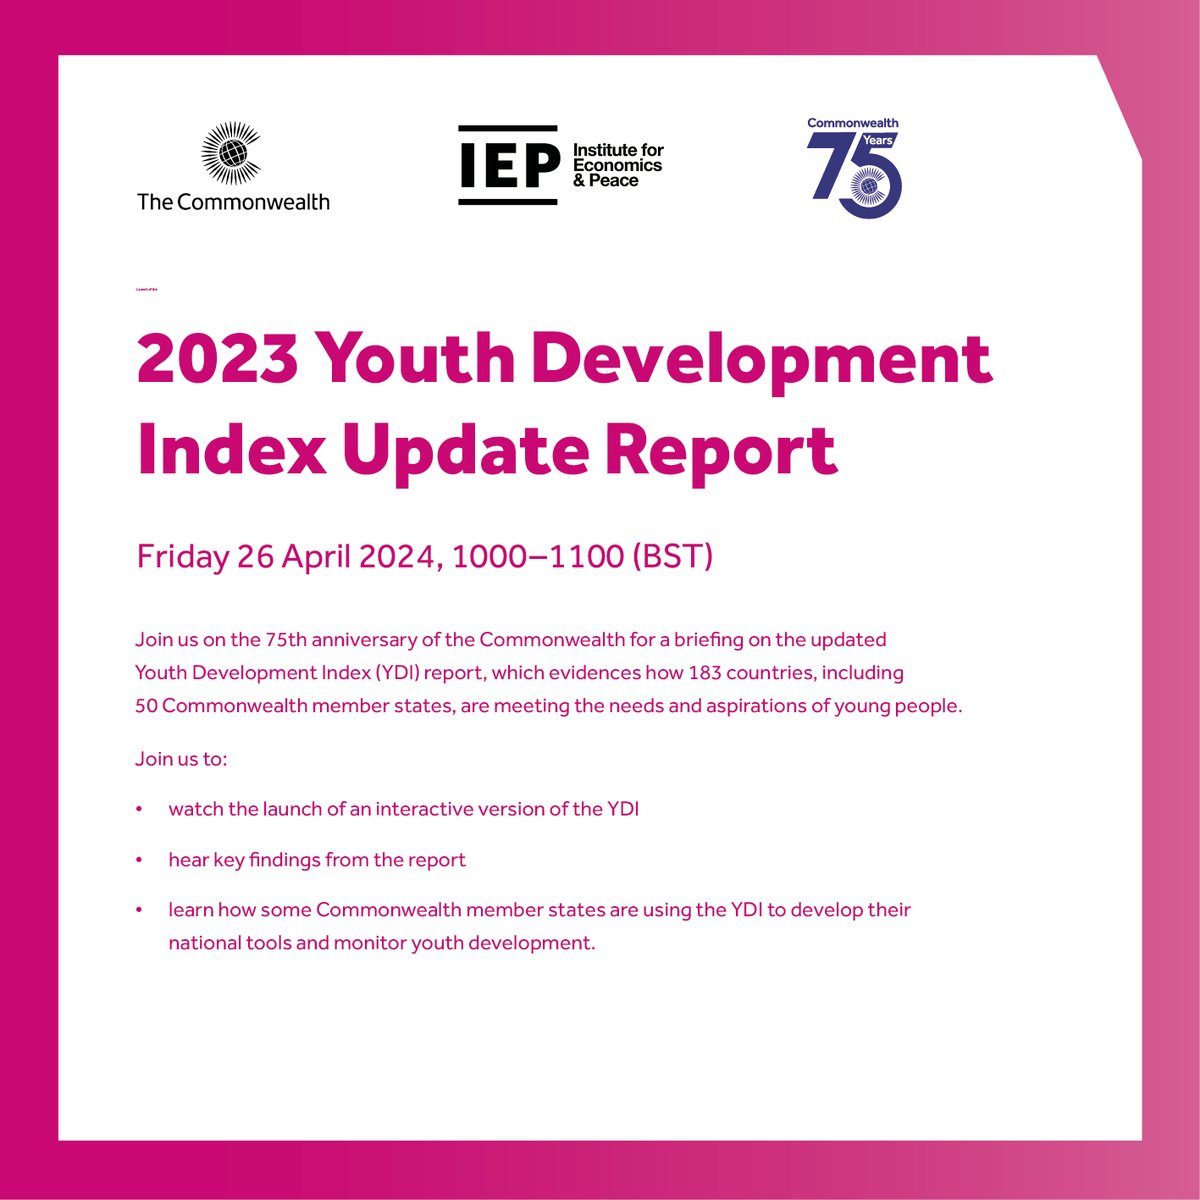 Join us for the launch of the Global #YouthDevelopment Index (#YDI) Update Report 2023 in partnership with @economicspeace  in Marlborough House and online.

🗓️ : 26 April 2024, 10:00-11:00 (BST)

Register here: bit.ly/3W5xv7U

#YearOfYouth